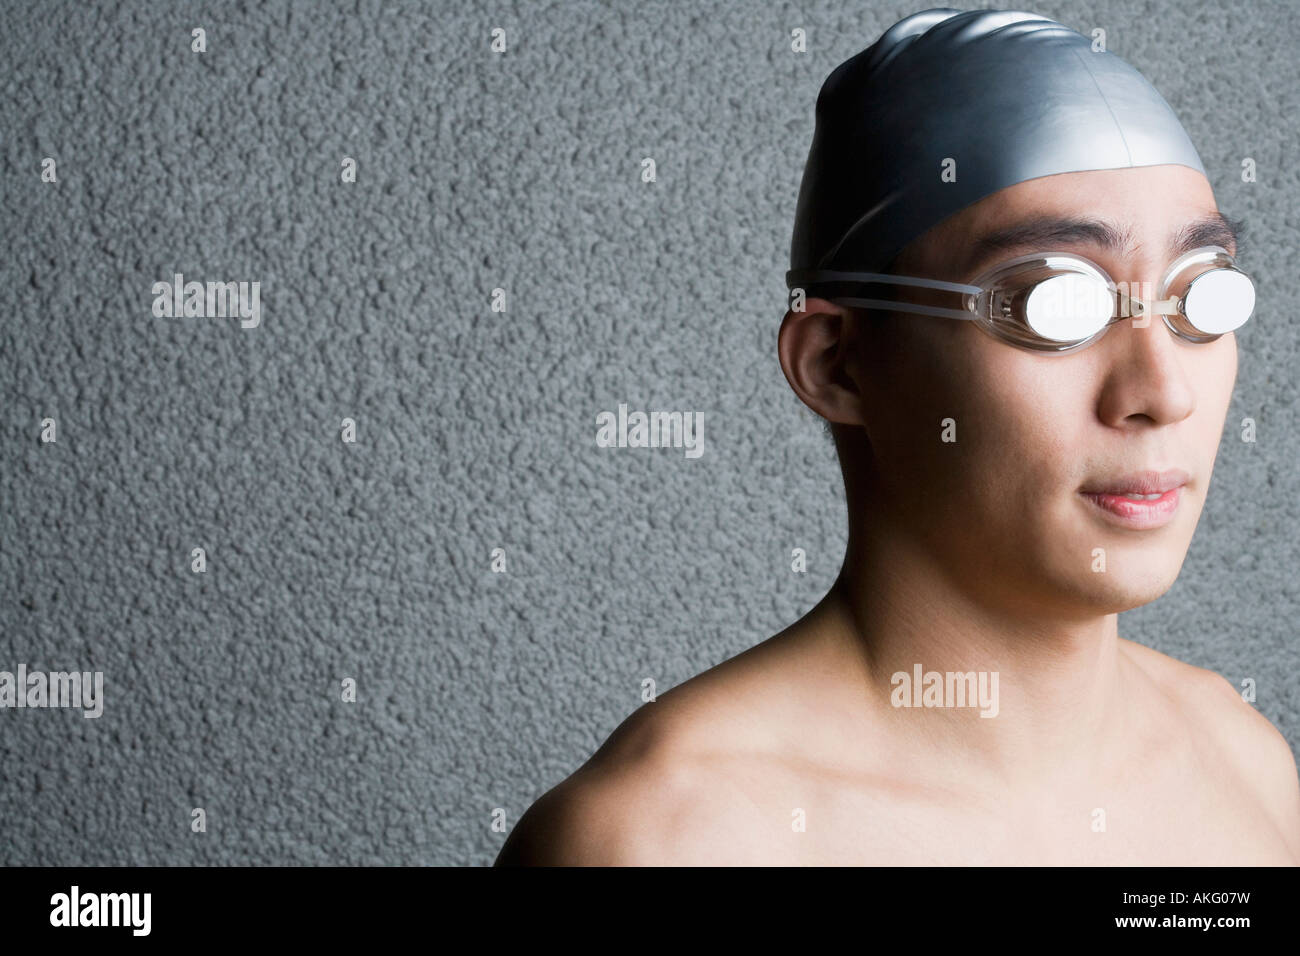 Close-up of a young man wearing swimming goggles Stock Photo